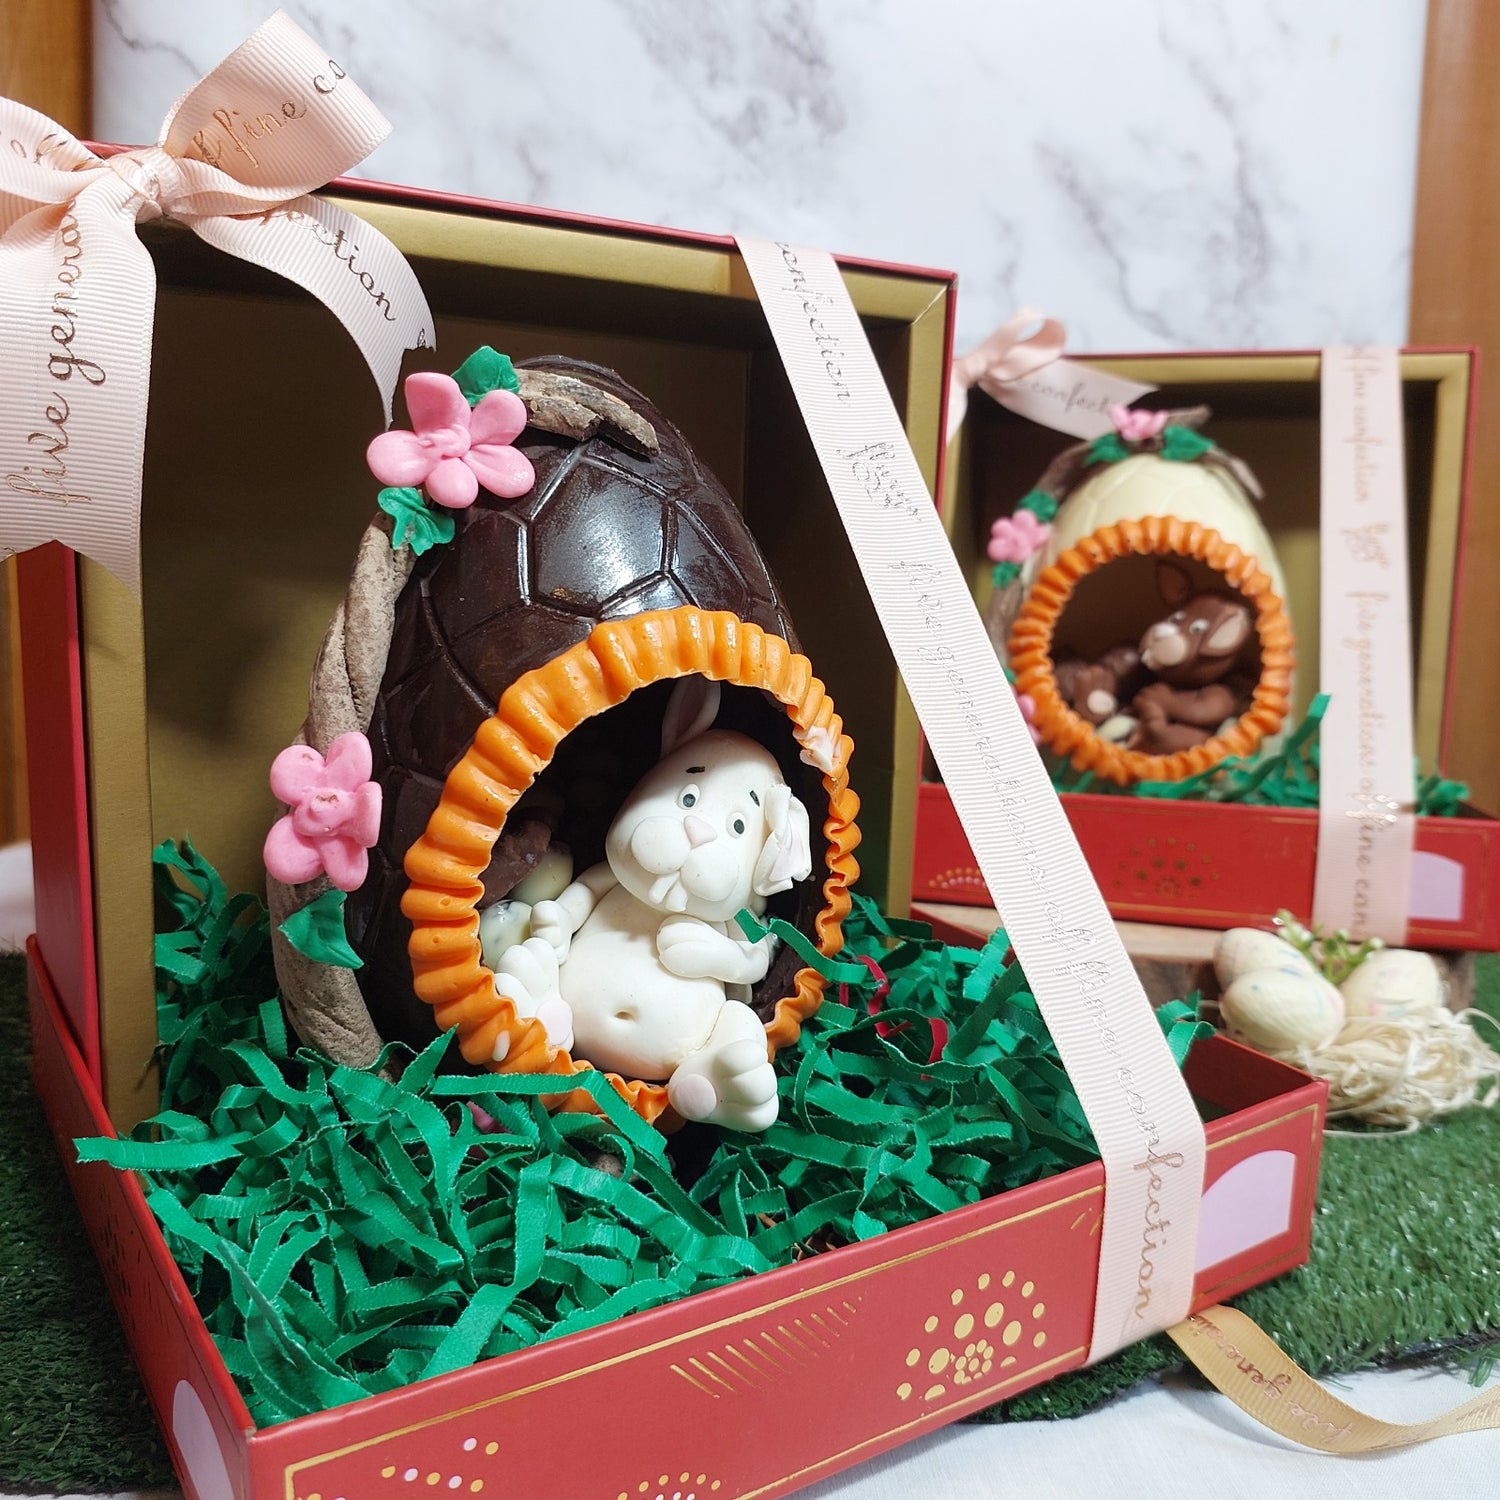 Decorative Chocolate Egg with Bunny (700 gm)